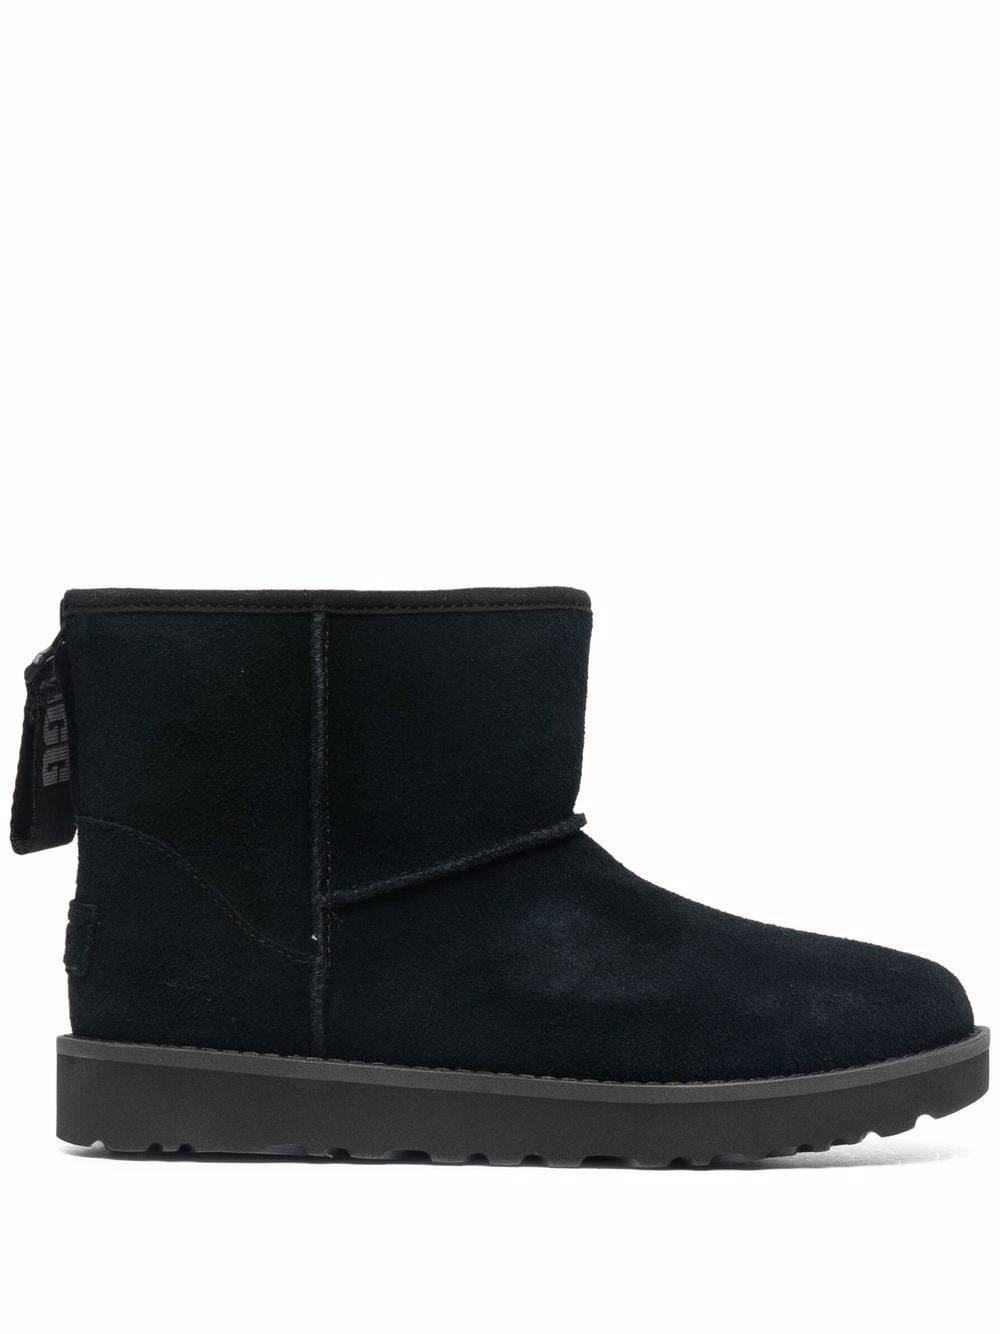 UGG classic zipped suede boots - Black von UGG